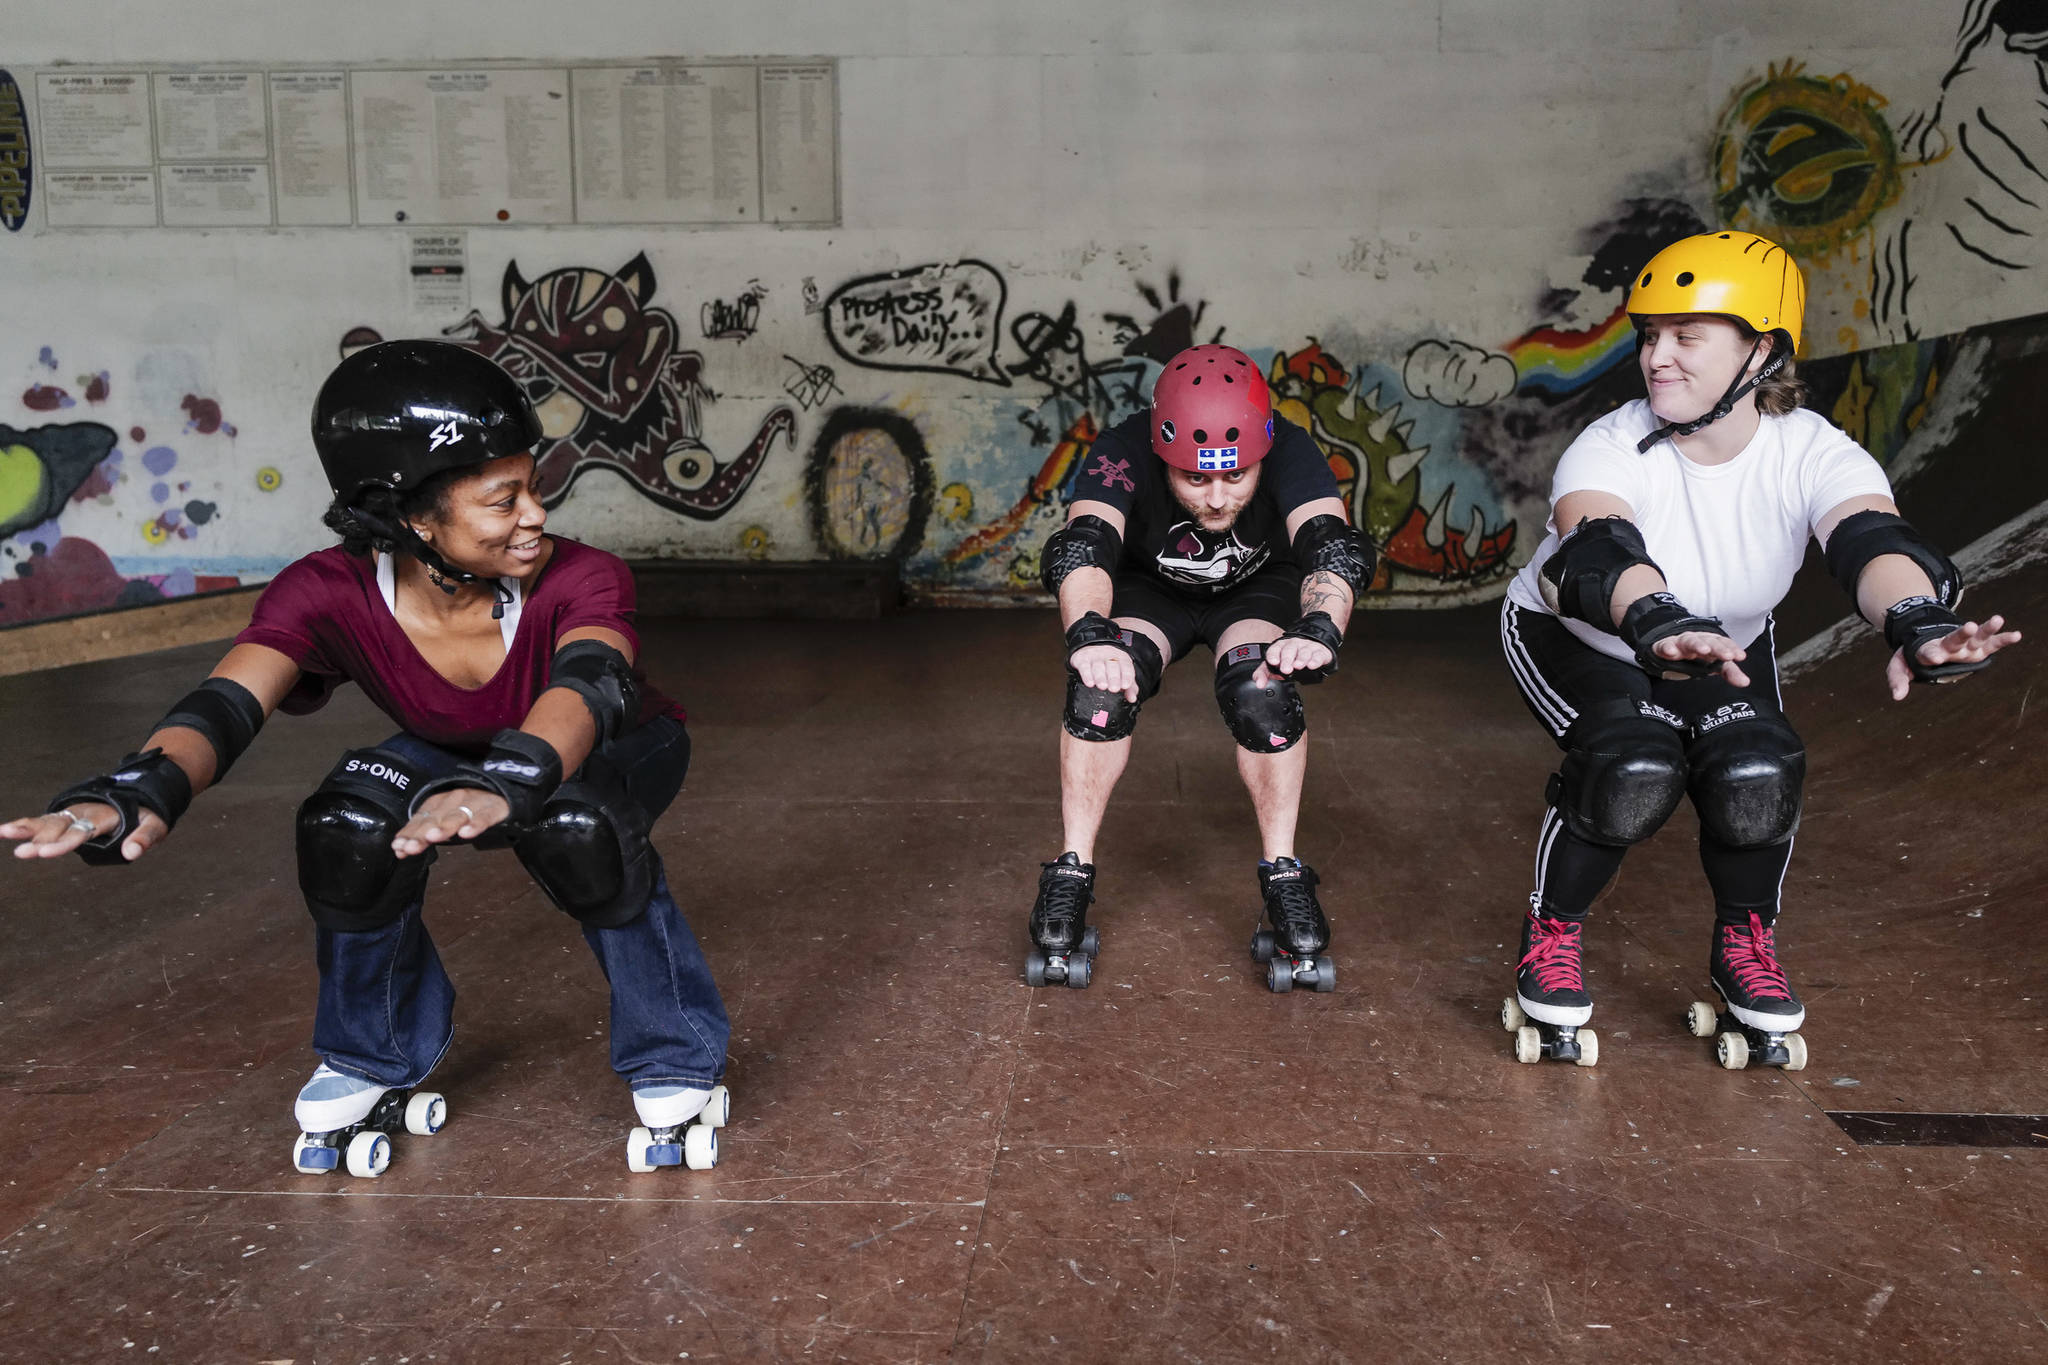 Jennifer Gross, right, and Shabadrang Khalsa, who skate with the Juneau Rollergirls, teach Empire reporter Michael S. Lockett how to rollerskate at the Pipeline Skate Park on Friday, Oct. 11, 2019. (Michael Penn | Juneau Empire)